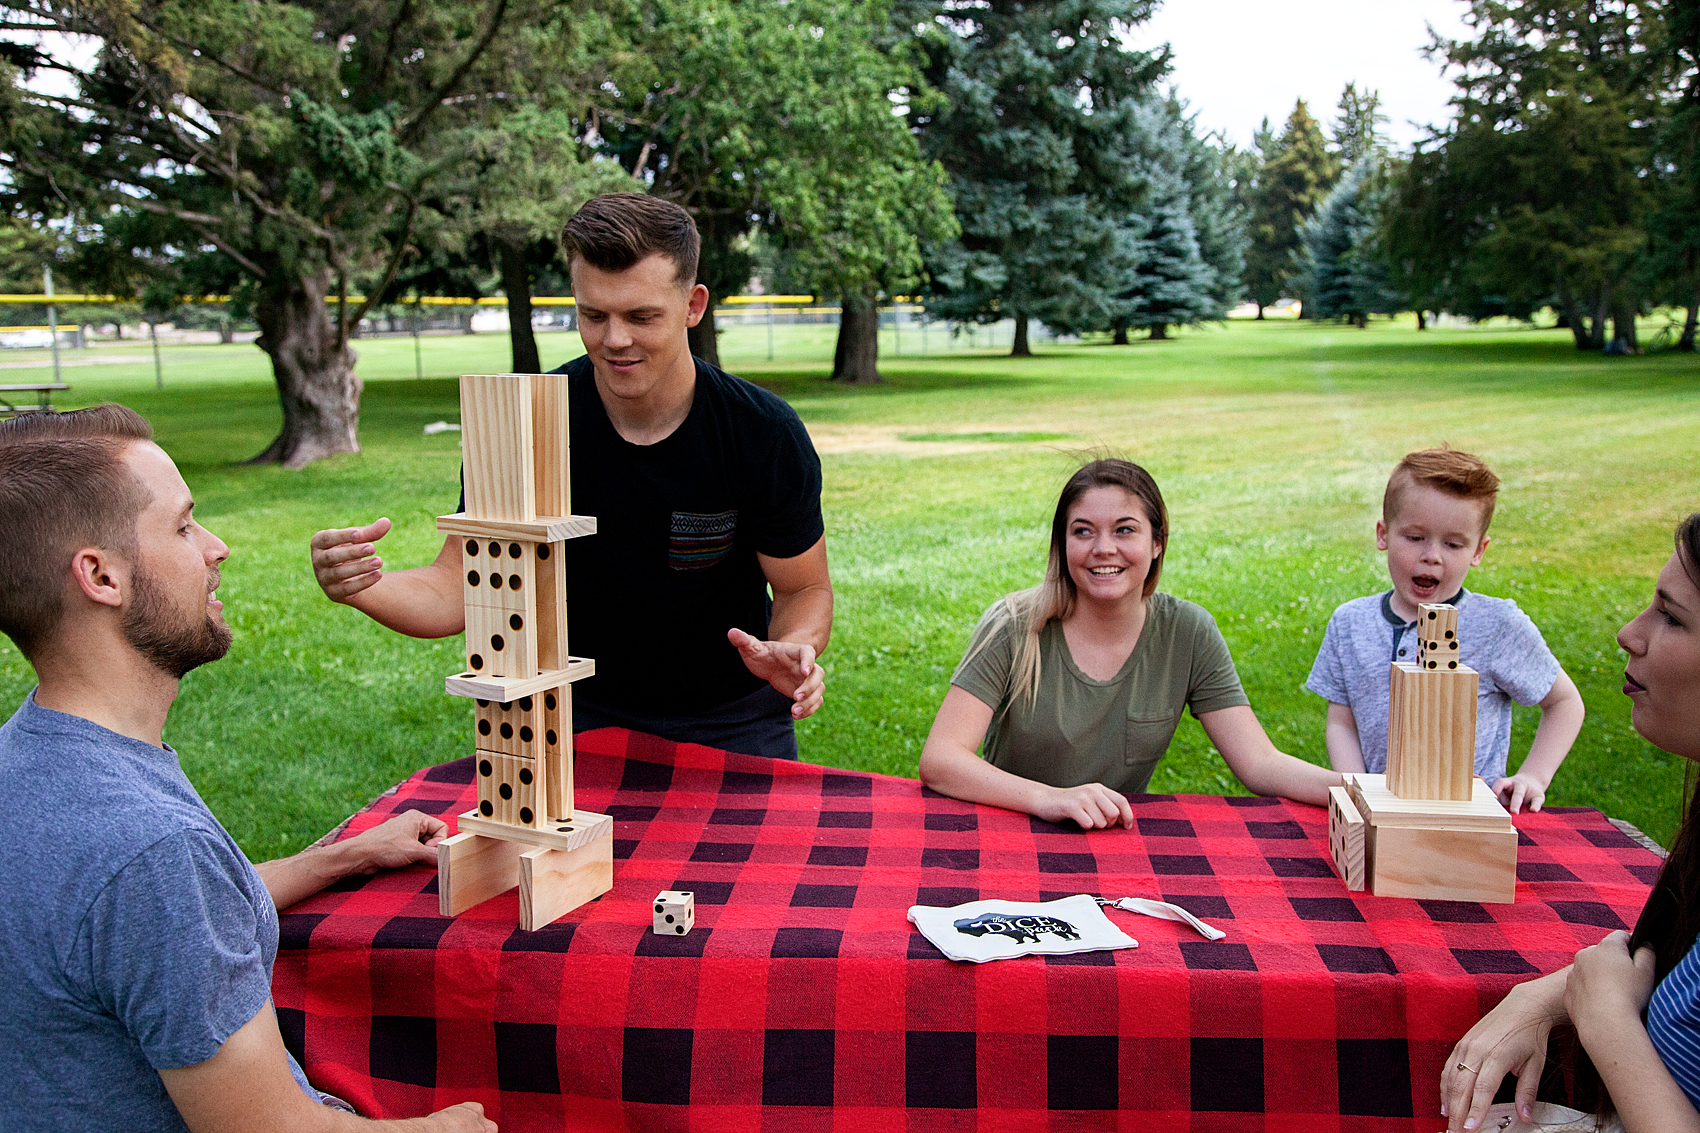 Come learn how to create carefree family fun with simple to make yard games via WhipperBerry.